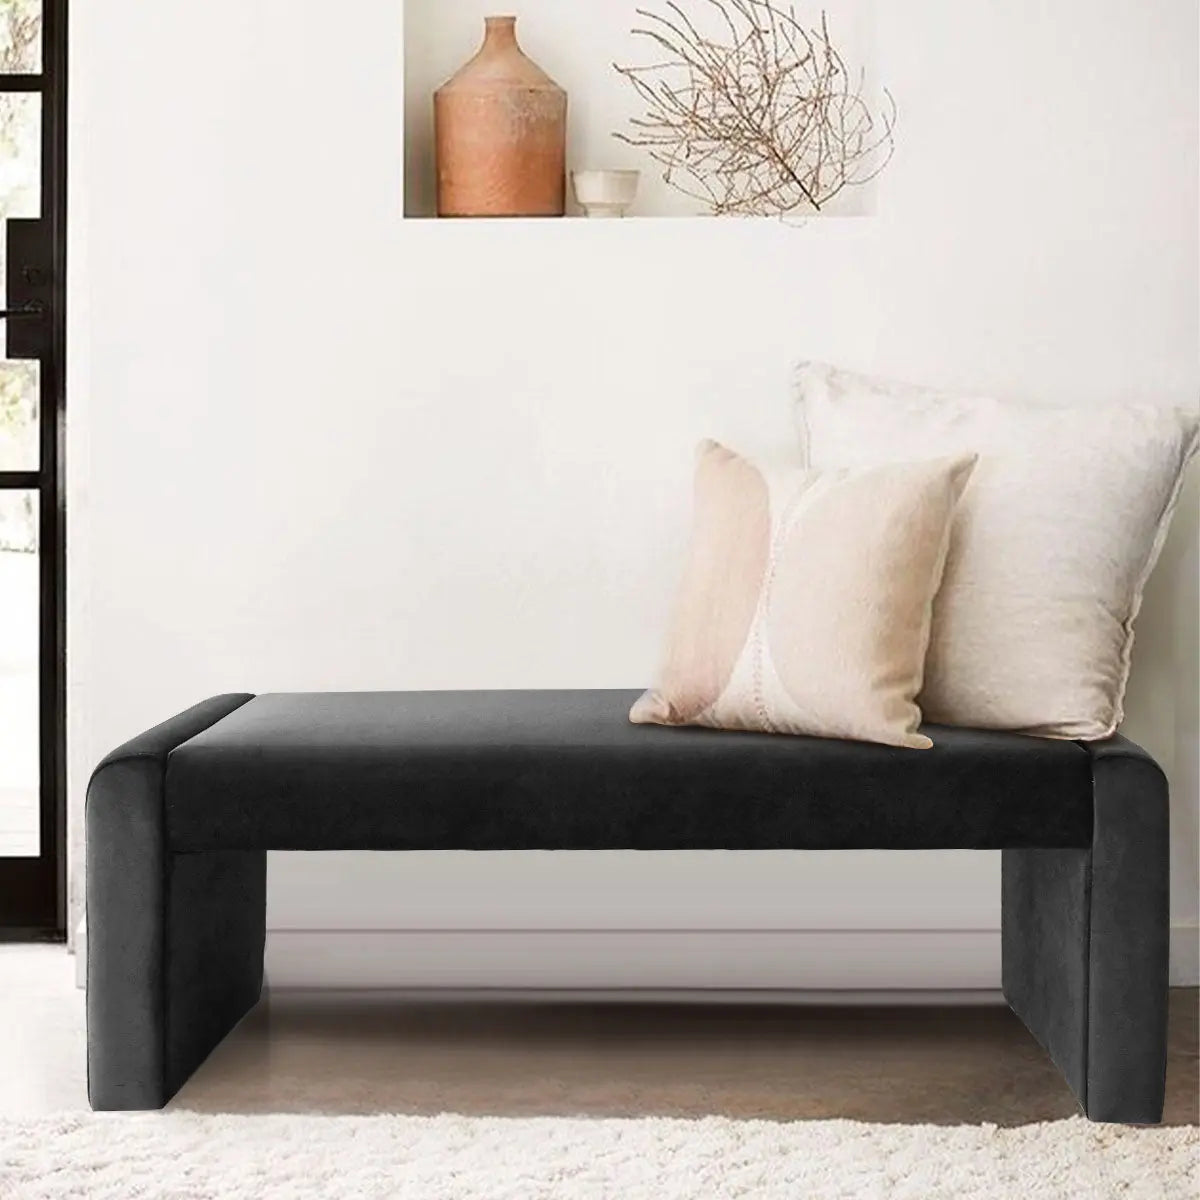 Kaia 47" Velvet and Faux Leather Bench - Elegant and Versatile Seating